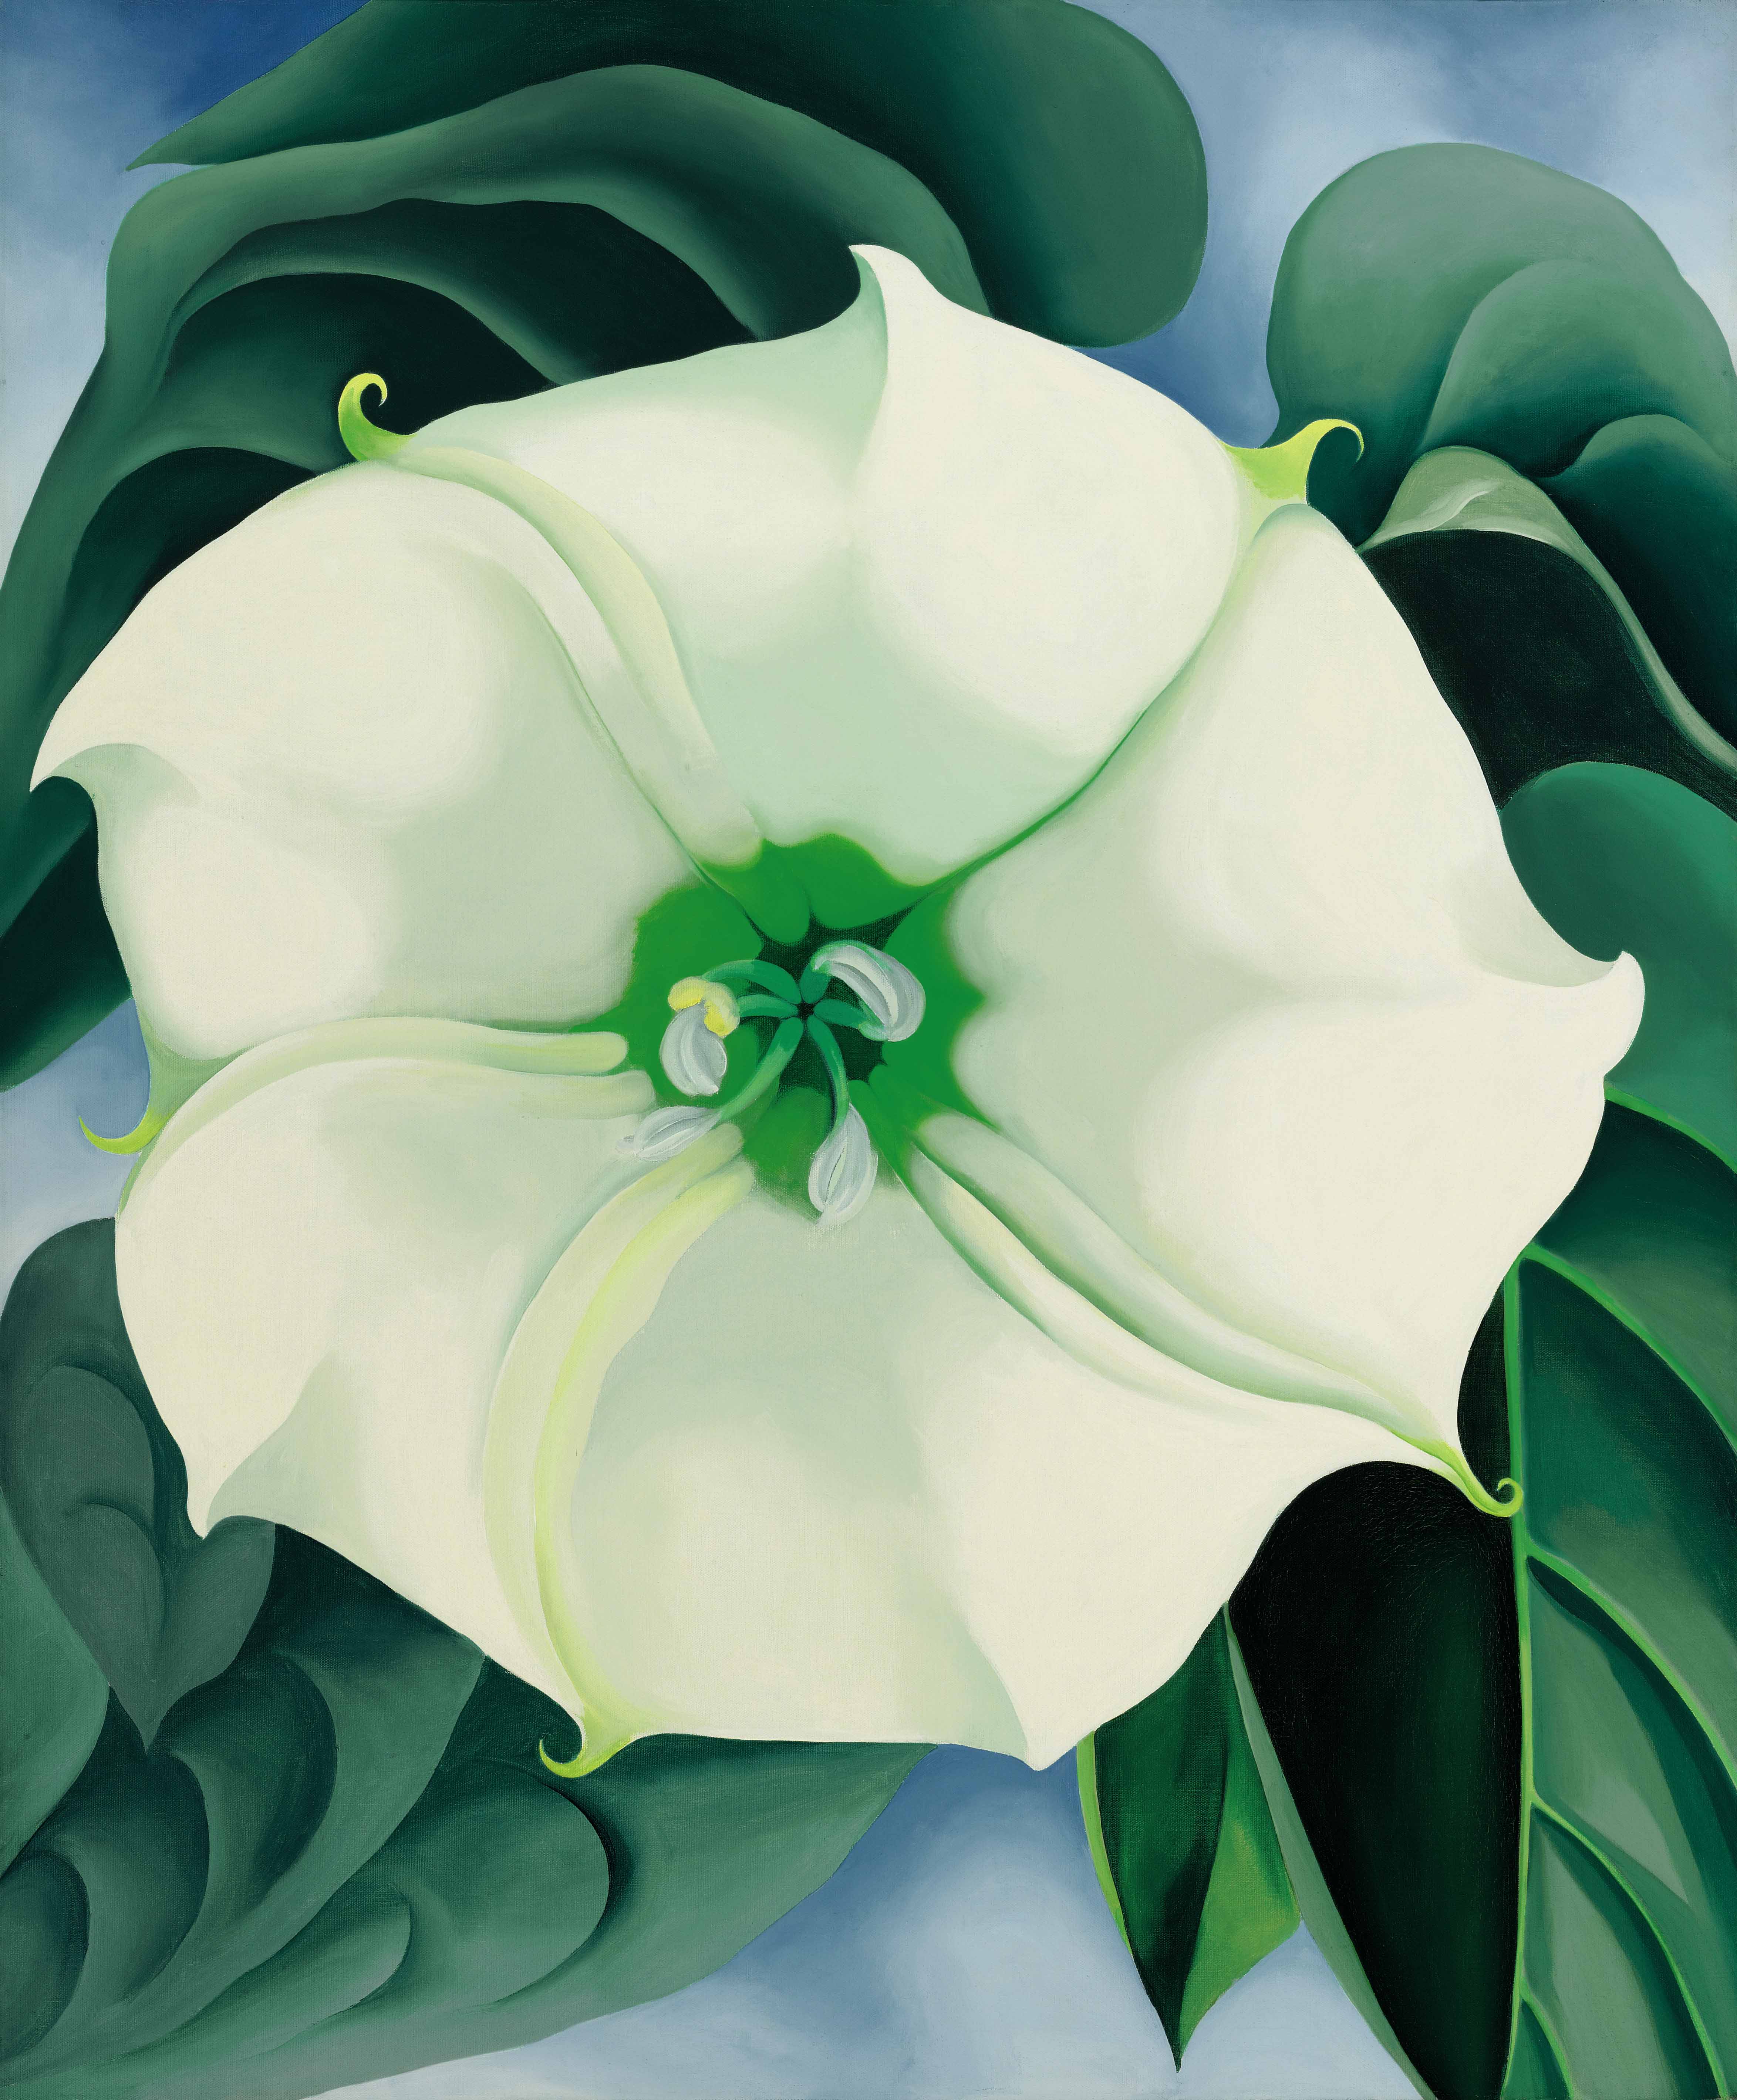 Georgia O’Keeffe, Jimson Weed/White Flower No. 1 (1932). Estimate $10/15 million, Sold for $44,405,000 at Sotheby's American Art sale on November 20, 2014. (Sotheby’s New York) 